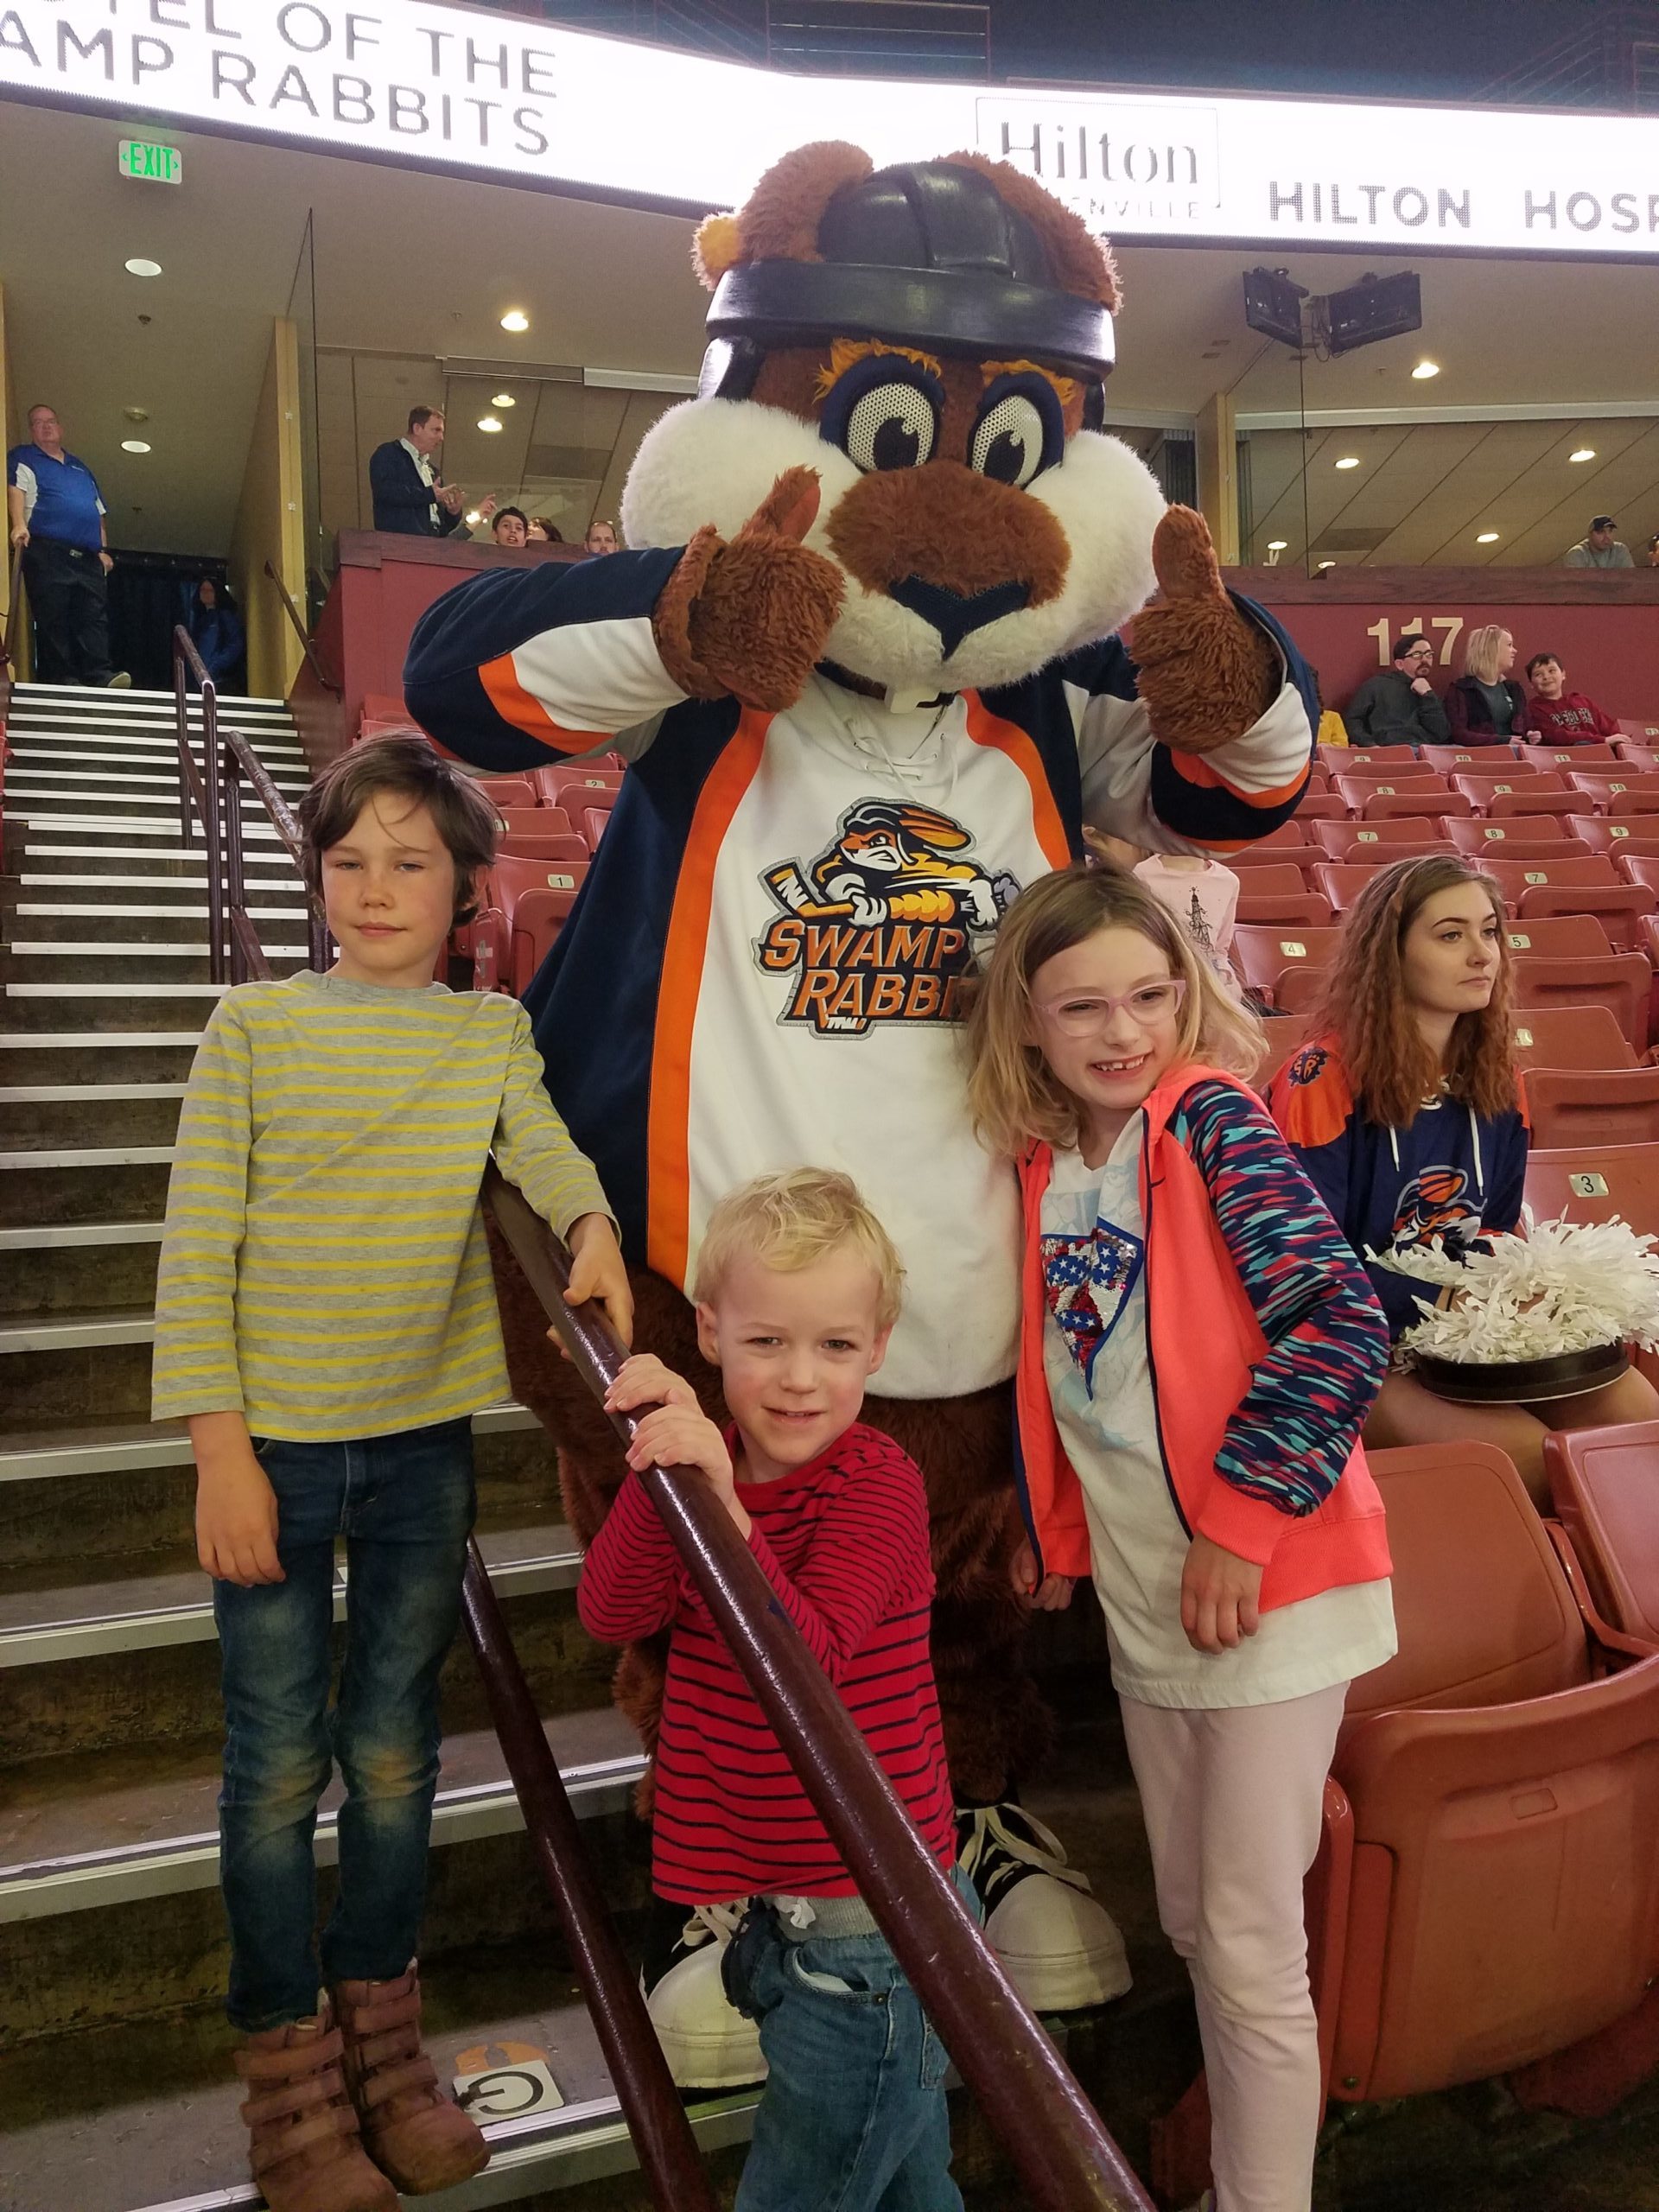 Young kids posing with Swamp Rabbit mascot